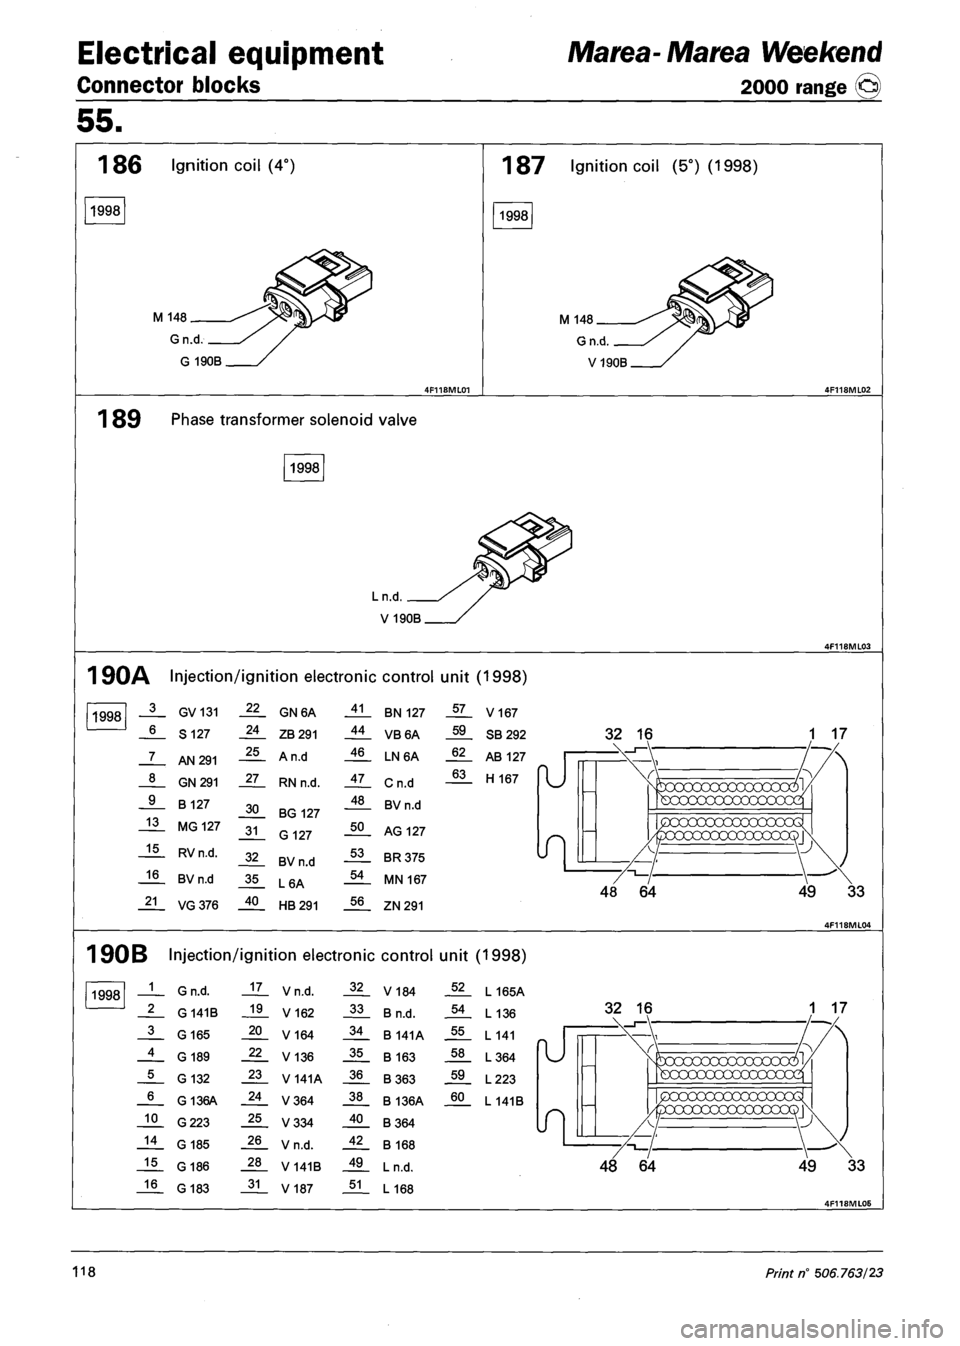 FIAT MAREA 2000 1.G Service Manual Electrical equipment 
Connector blocks 
Marea- Matea Weekend 
2000 range © 
55. 
1 86 Ignition coil (4°) 
1998 
M 148 
Gn.d 
G 190B 
187 Ignition coil (5°) (1998) 
1998 
M 148 
1 89 Phase transform